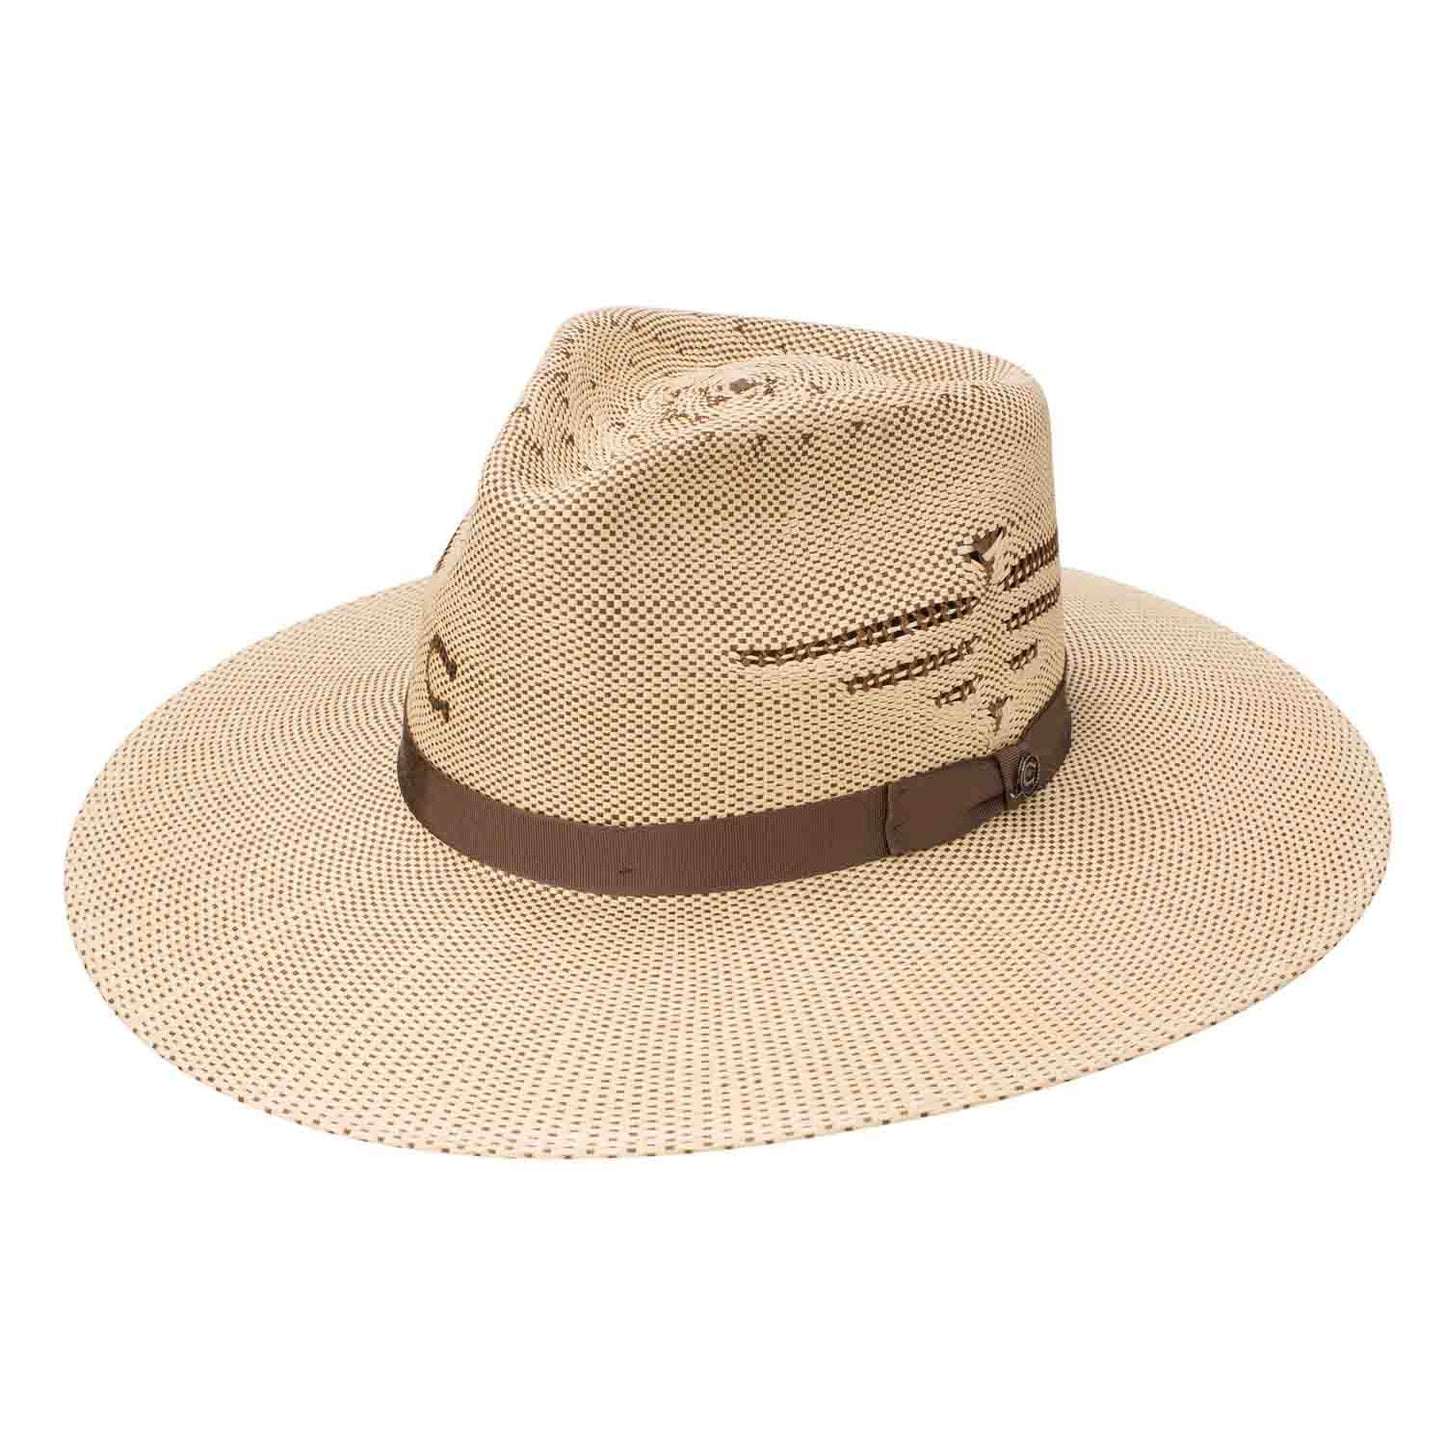 Charlie 1 Horse Mexico Shore Straw Hat Tan-Brown